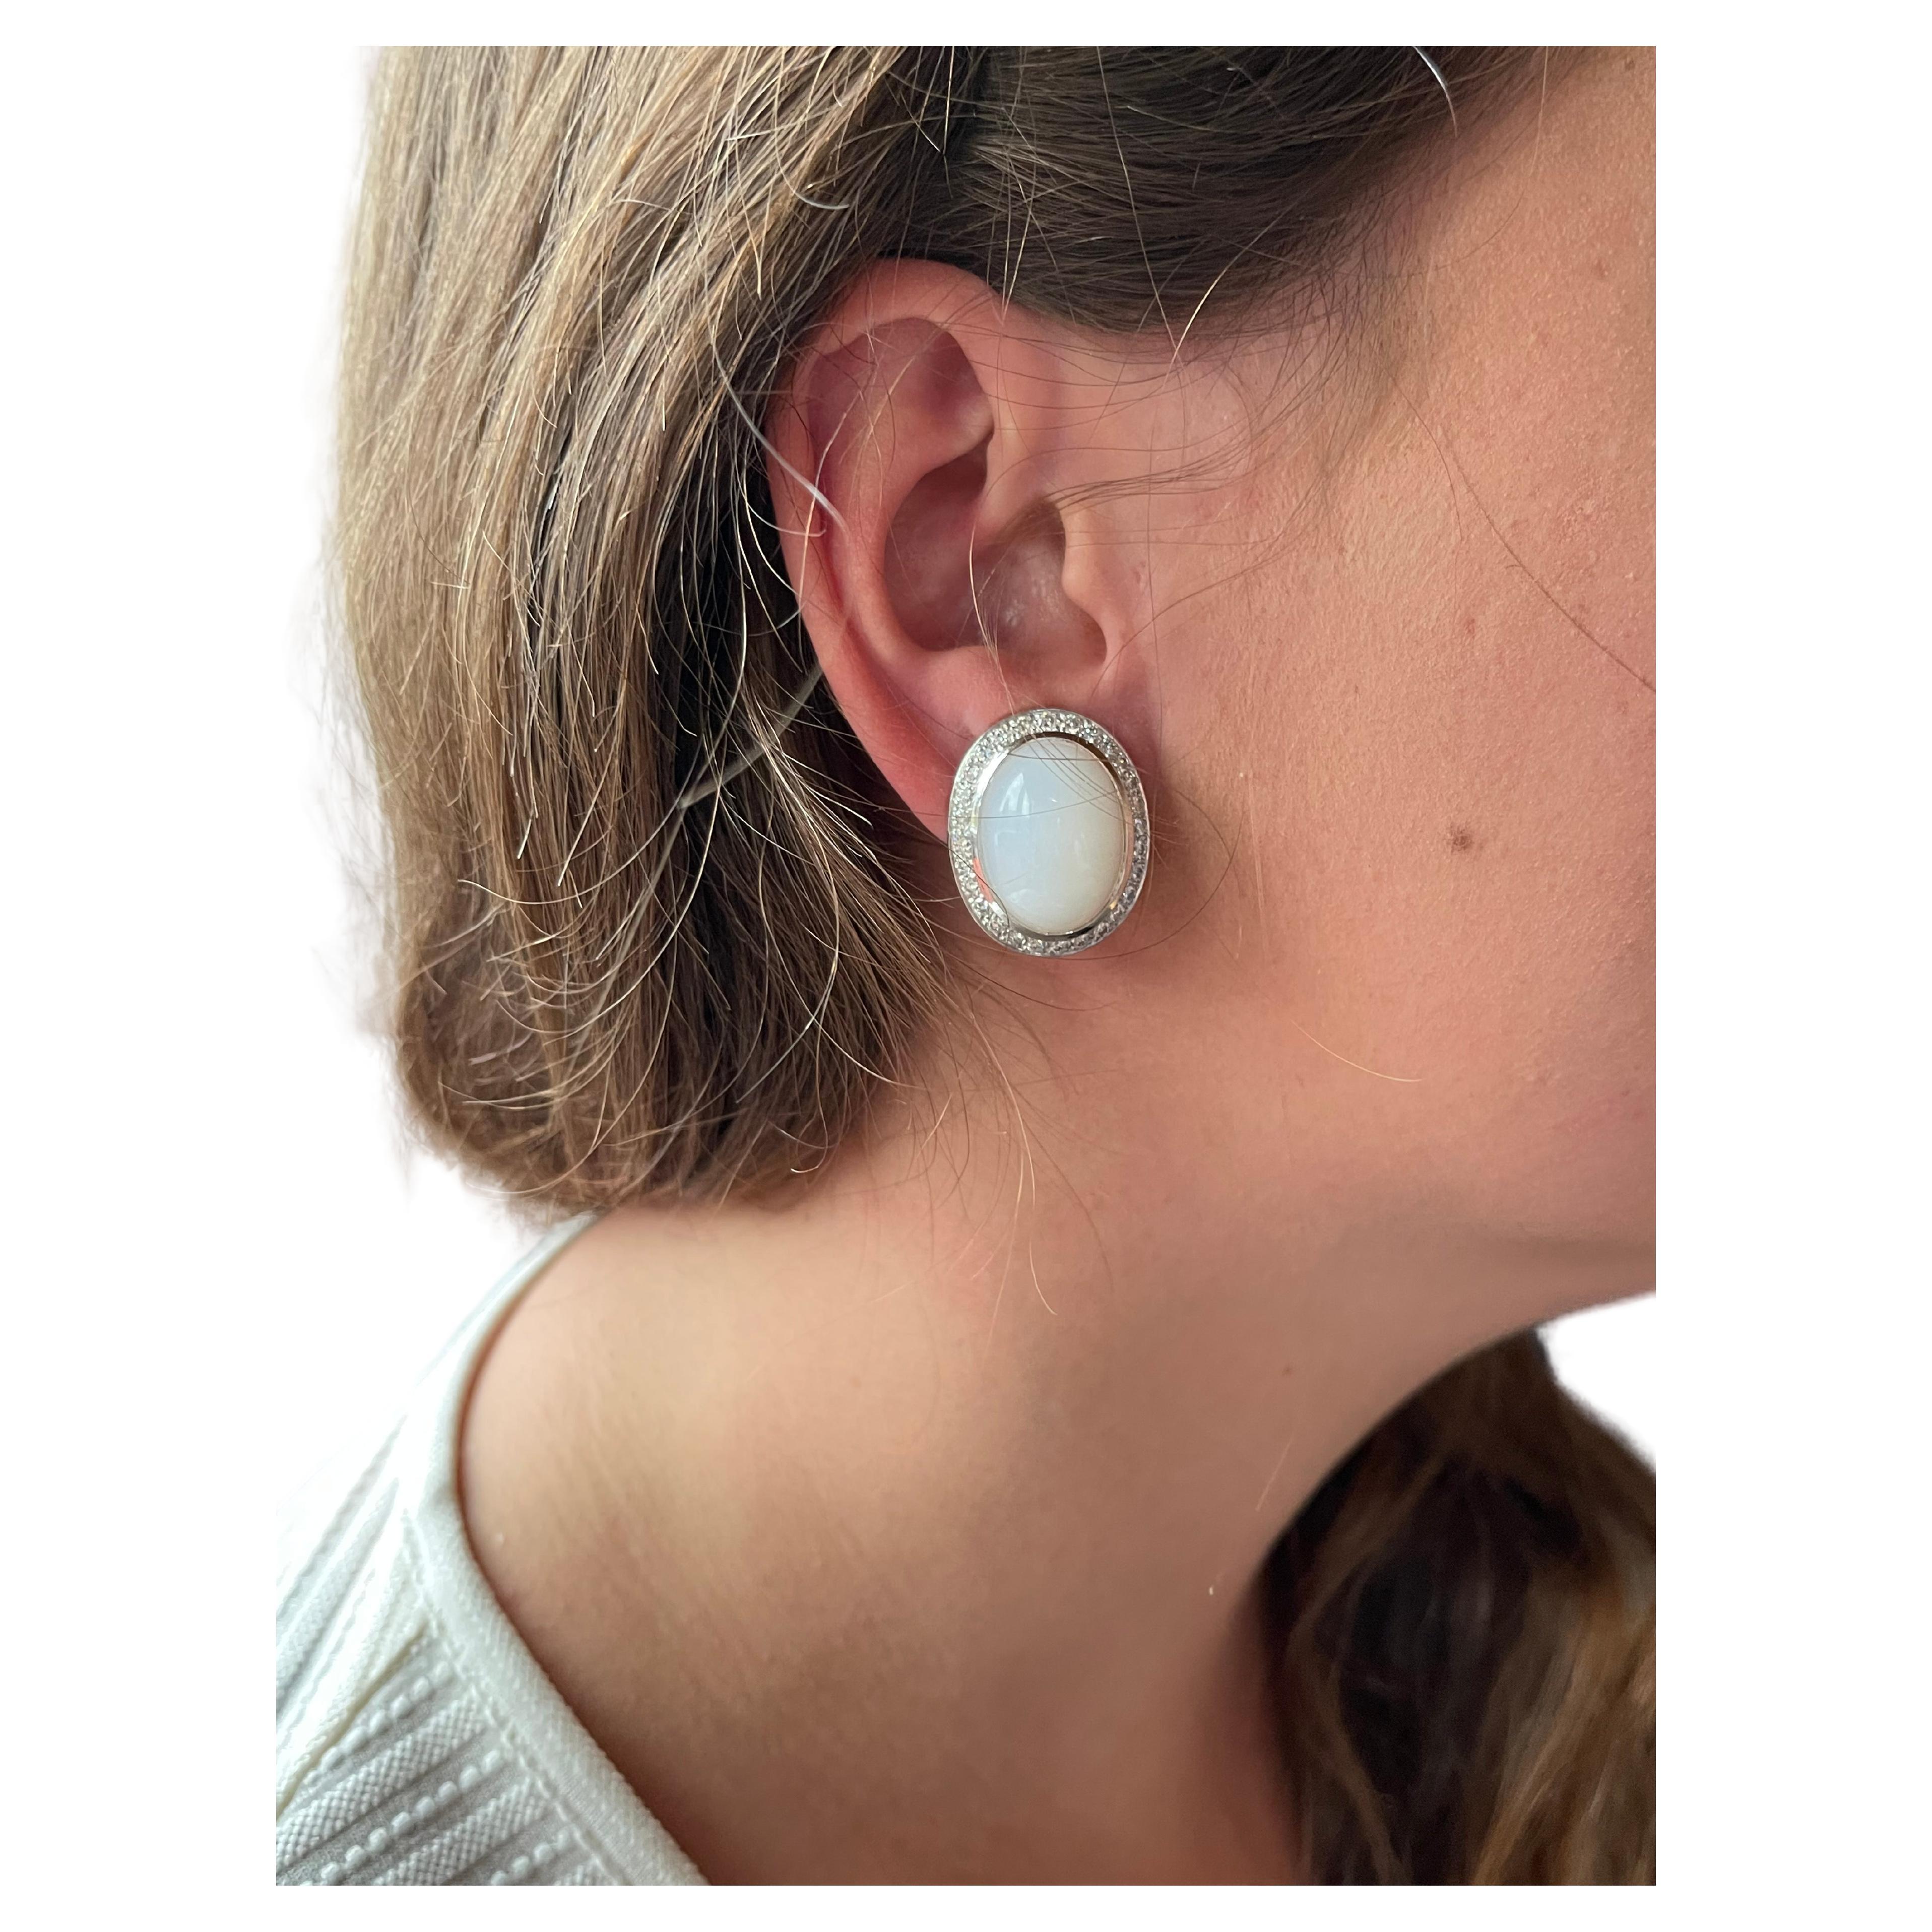 Elegant 18 K white Gold earclips featuring 2 lovely Moonstone Cabochons weighing 30.91 ct and surrounded by 56 brilliant cut Diamonds with a total weight of 1.96 ct, G color, vs clarity. 
Masterfully handcrafted piece! Authenticity and money back is